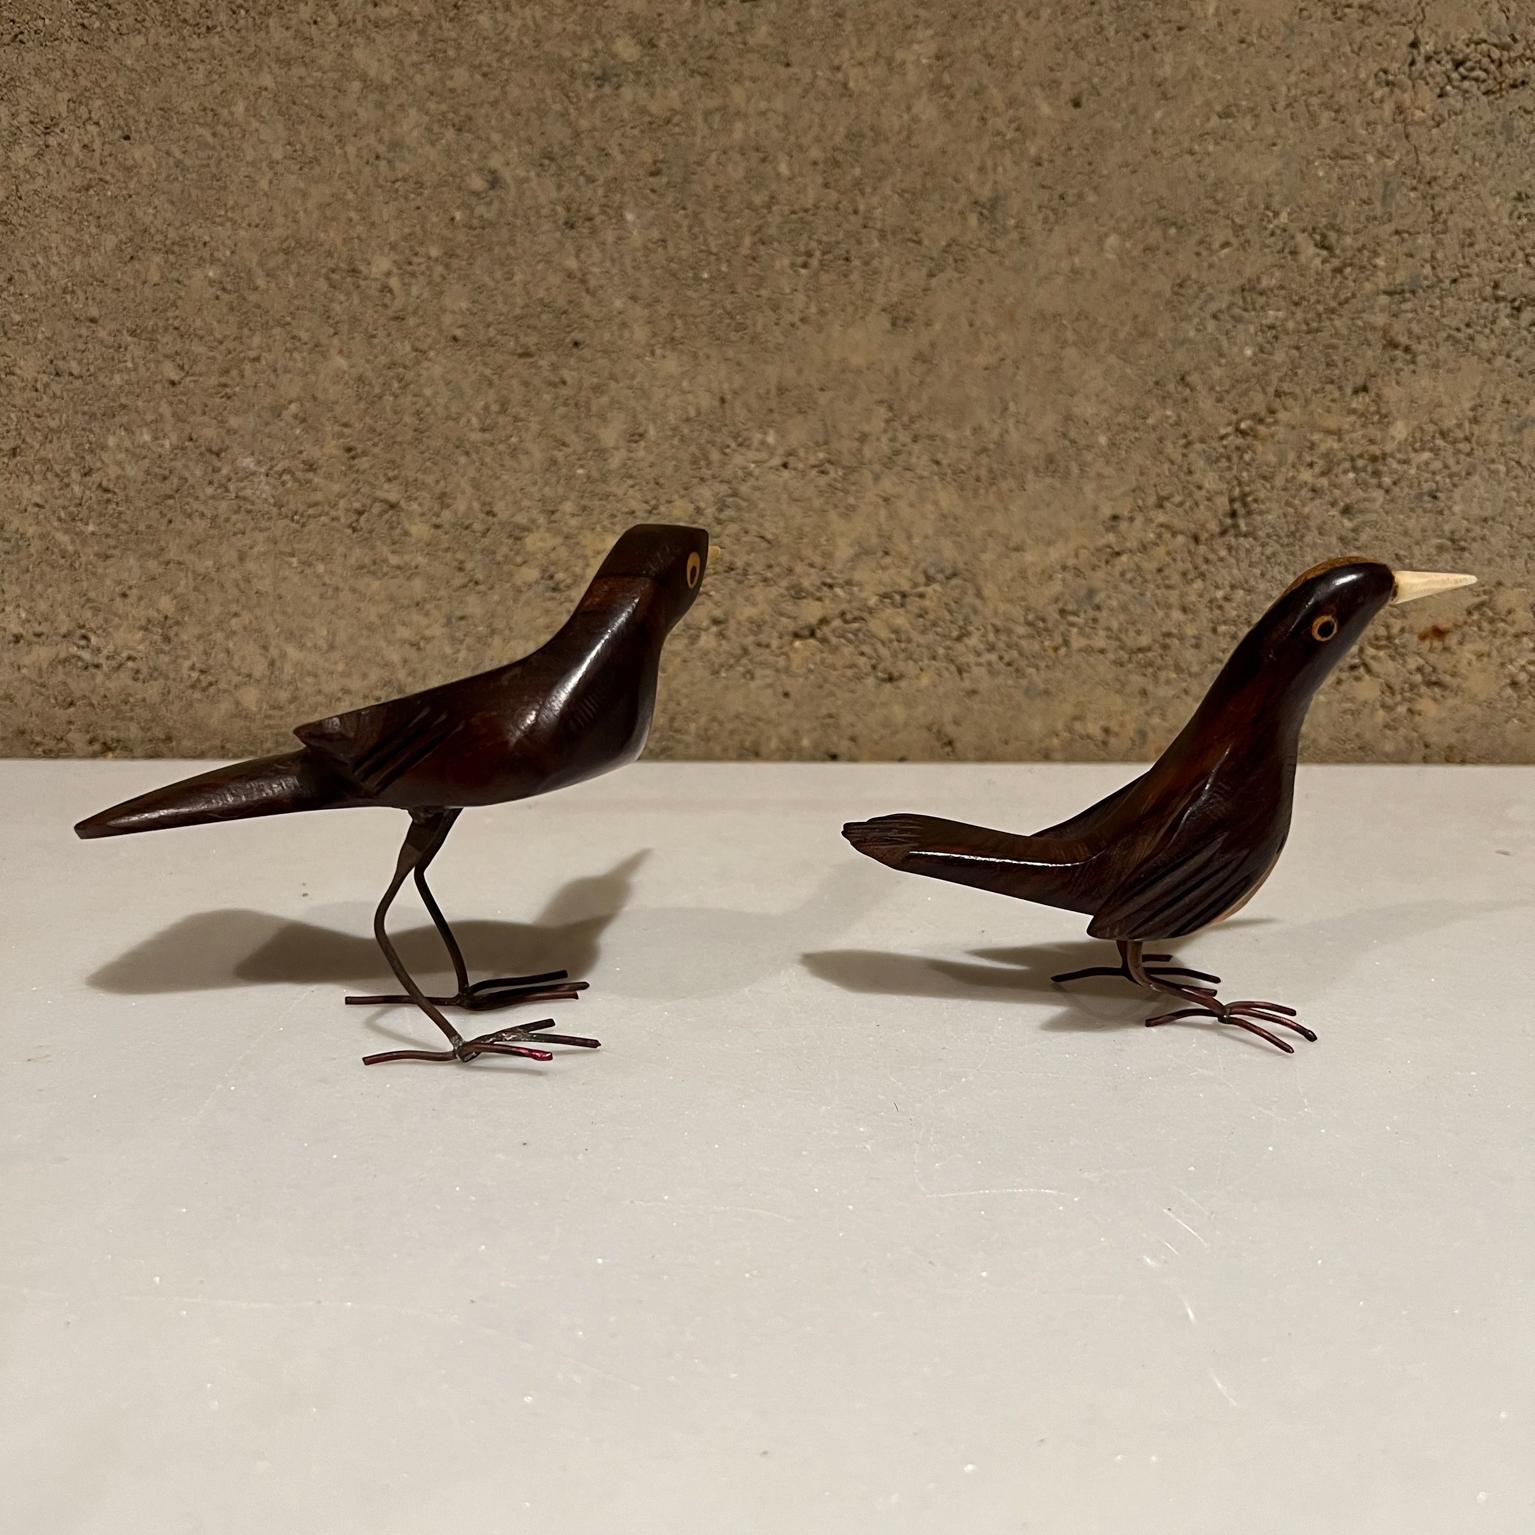 Late 20th Century Mid 20th Century Hand Carved Birds in Palo Fierro Wood